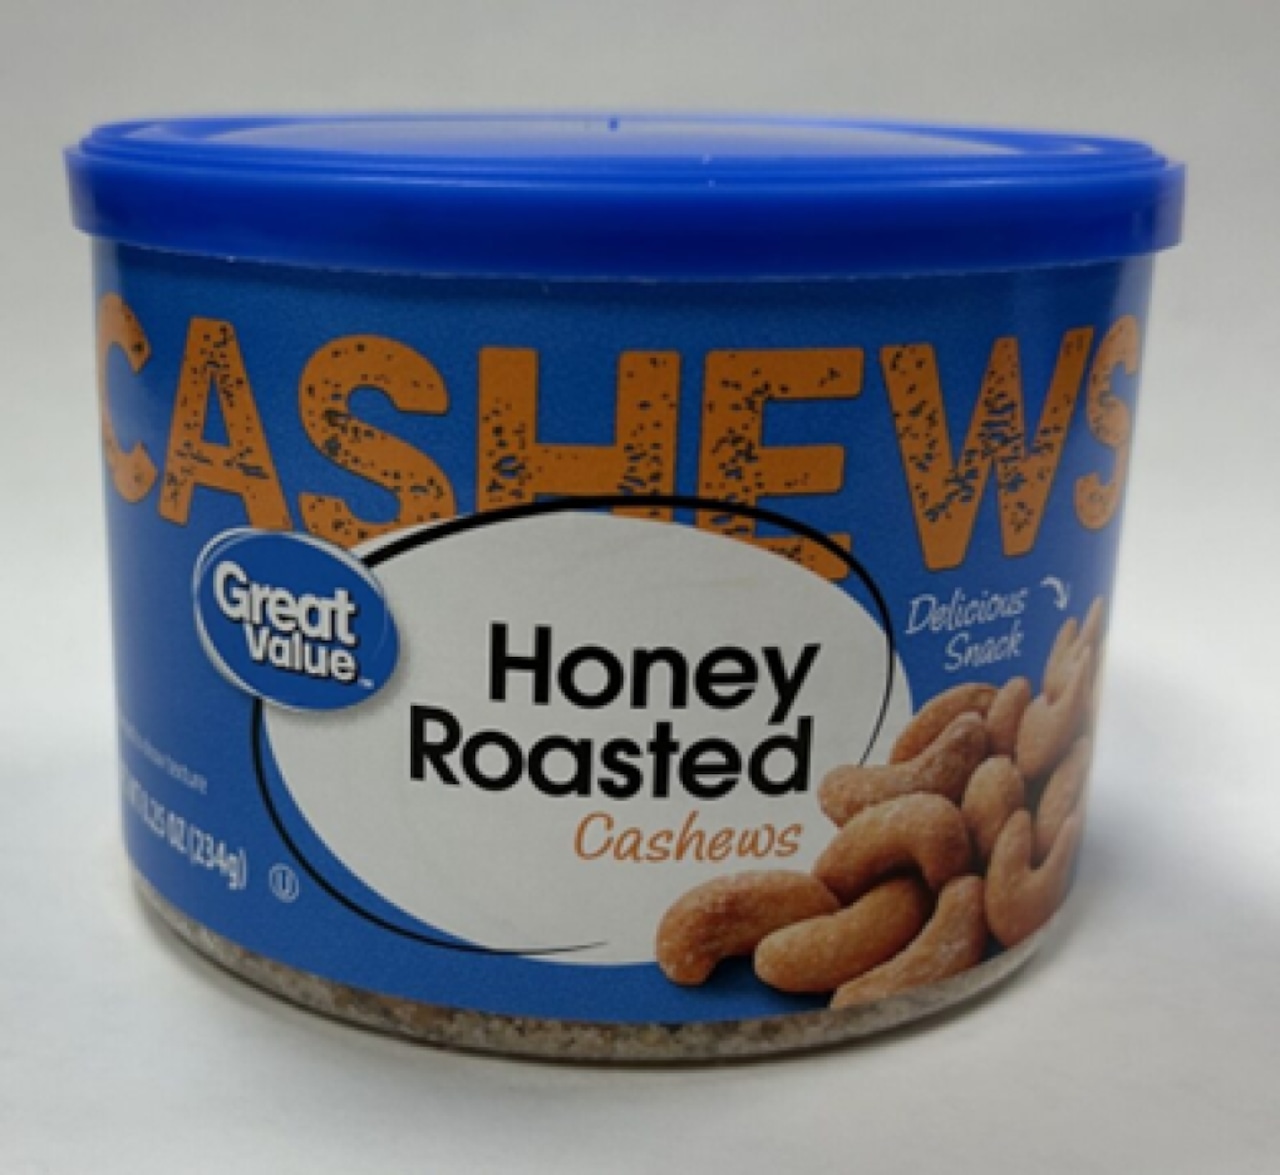 Cashews sold at Walmarts in Massachusetts recalled over allergy concerns [Video]